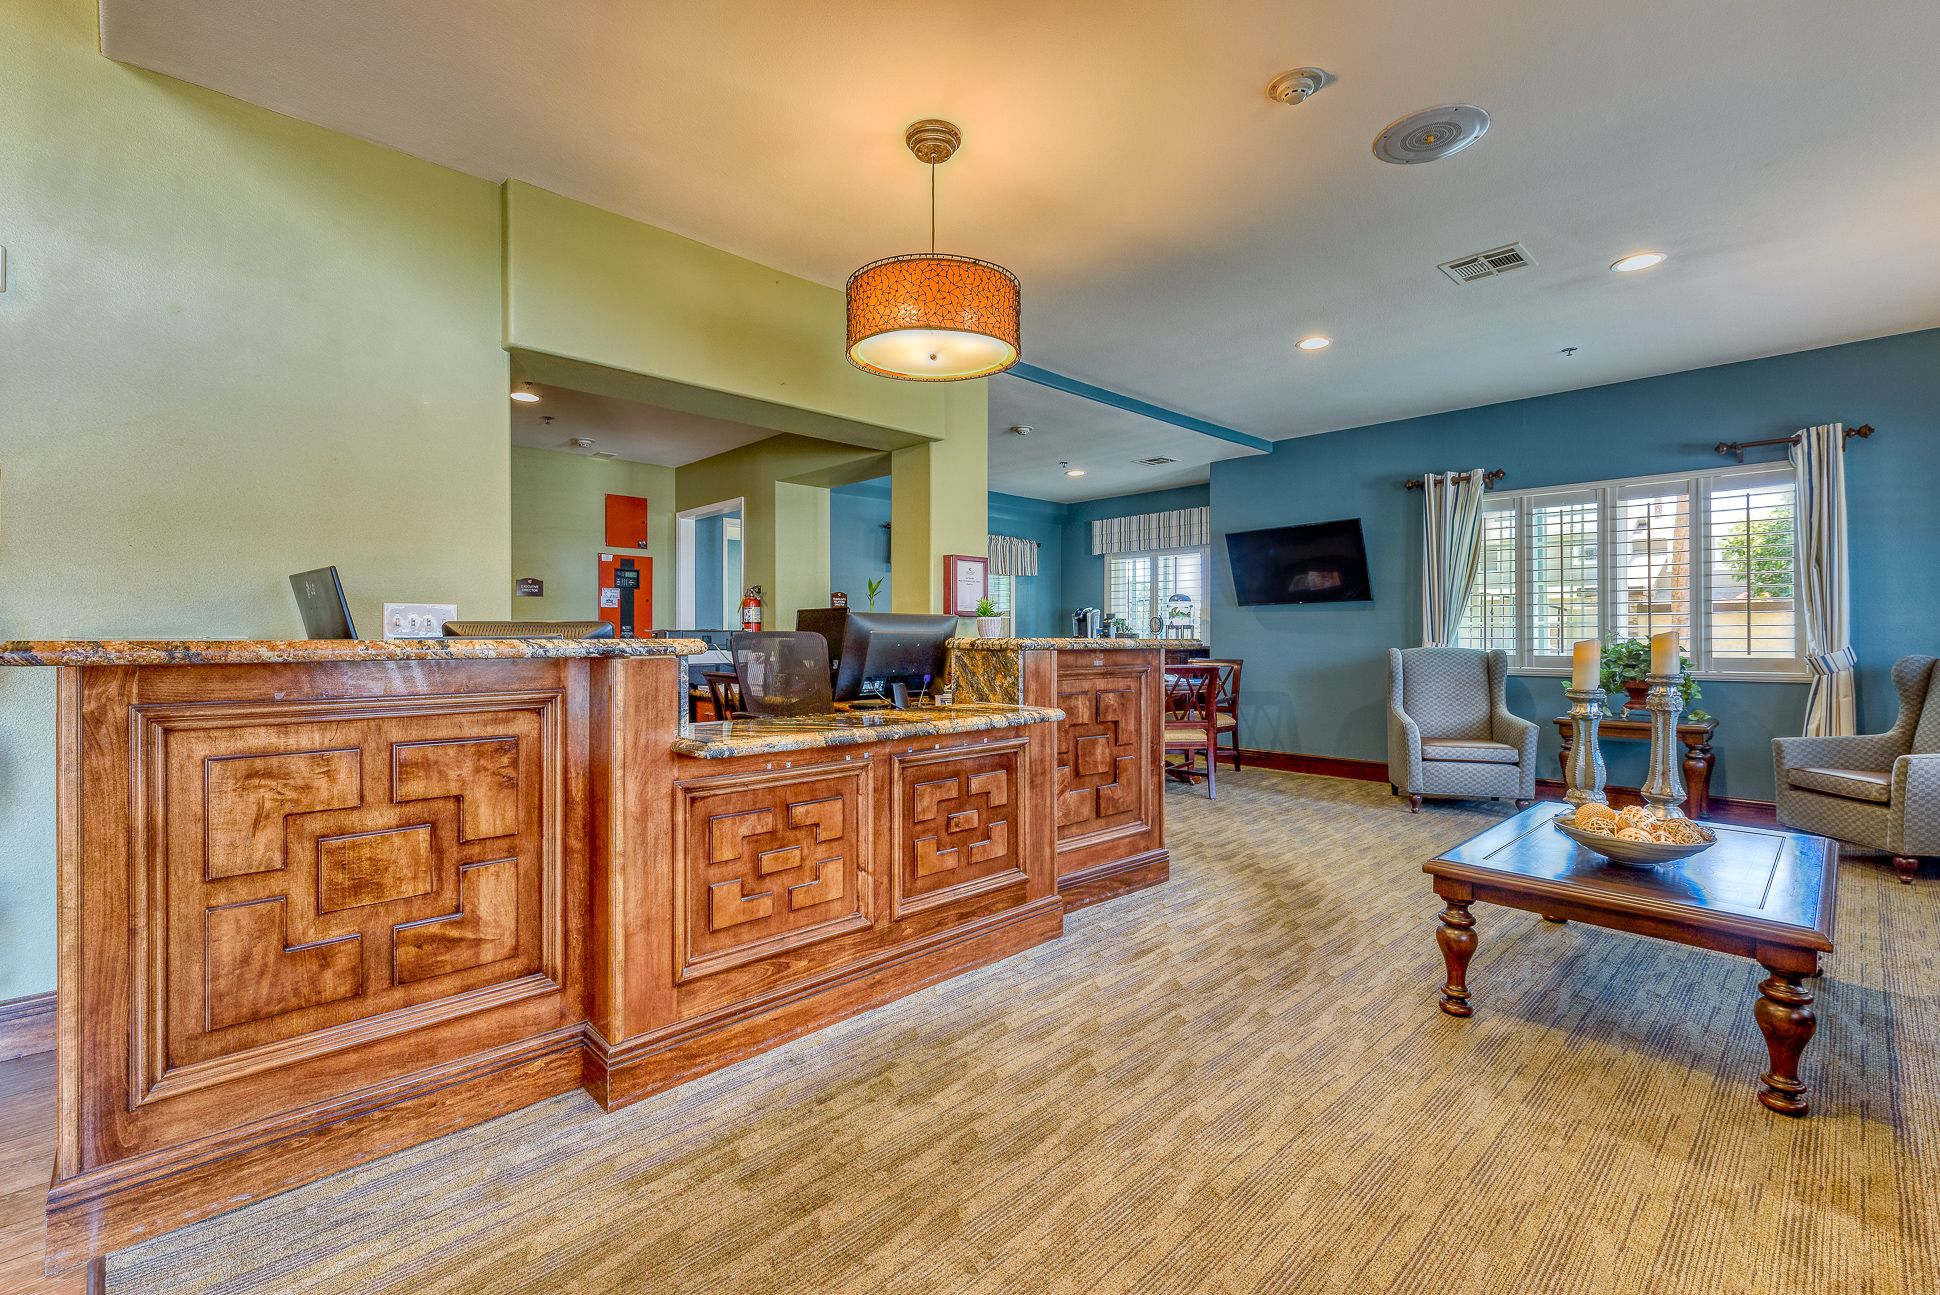 Interior view of Pacifica Senior Living South Coast with hardwood floors and modern decor.